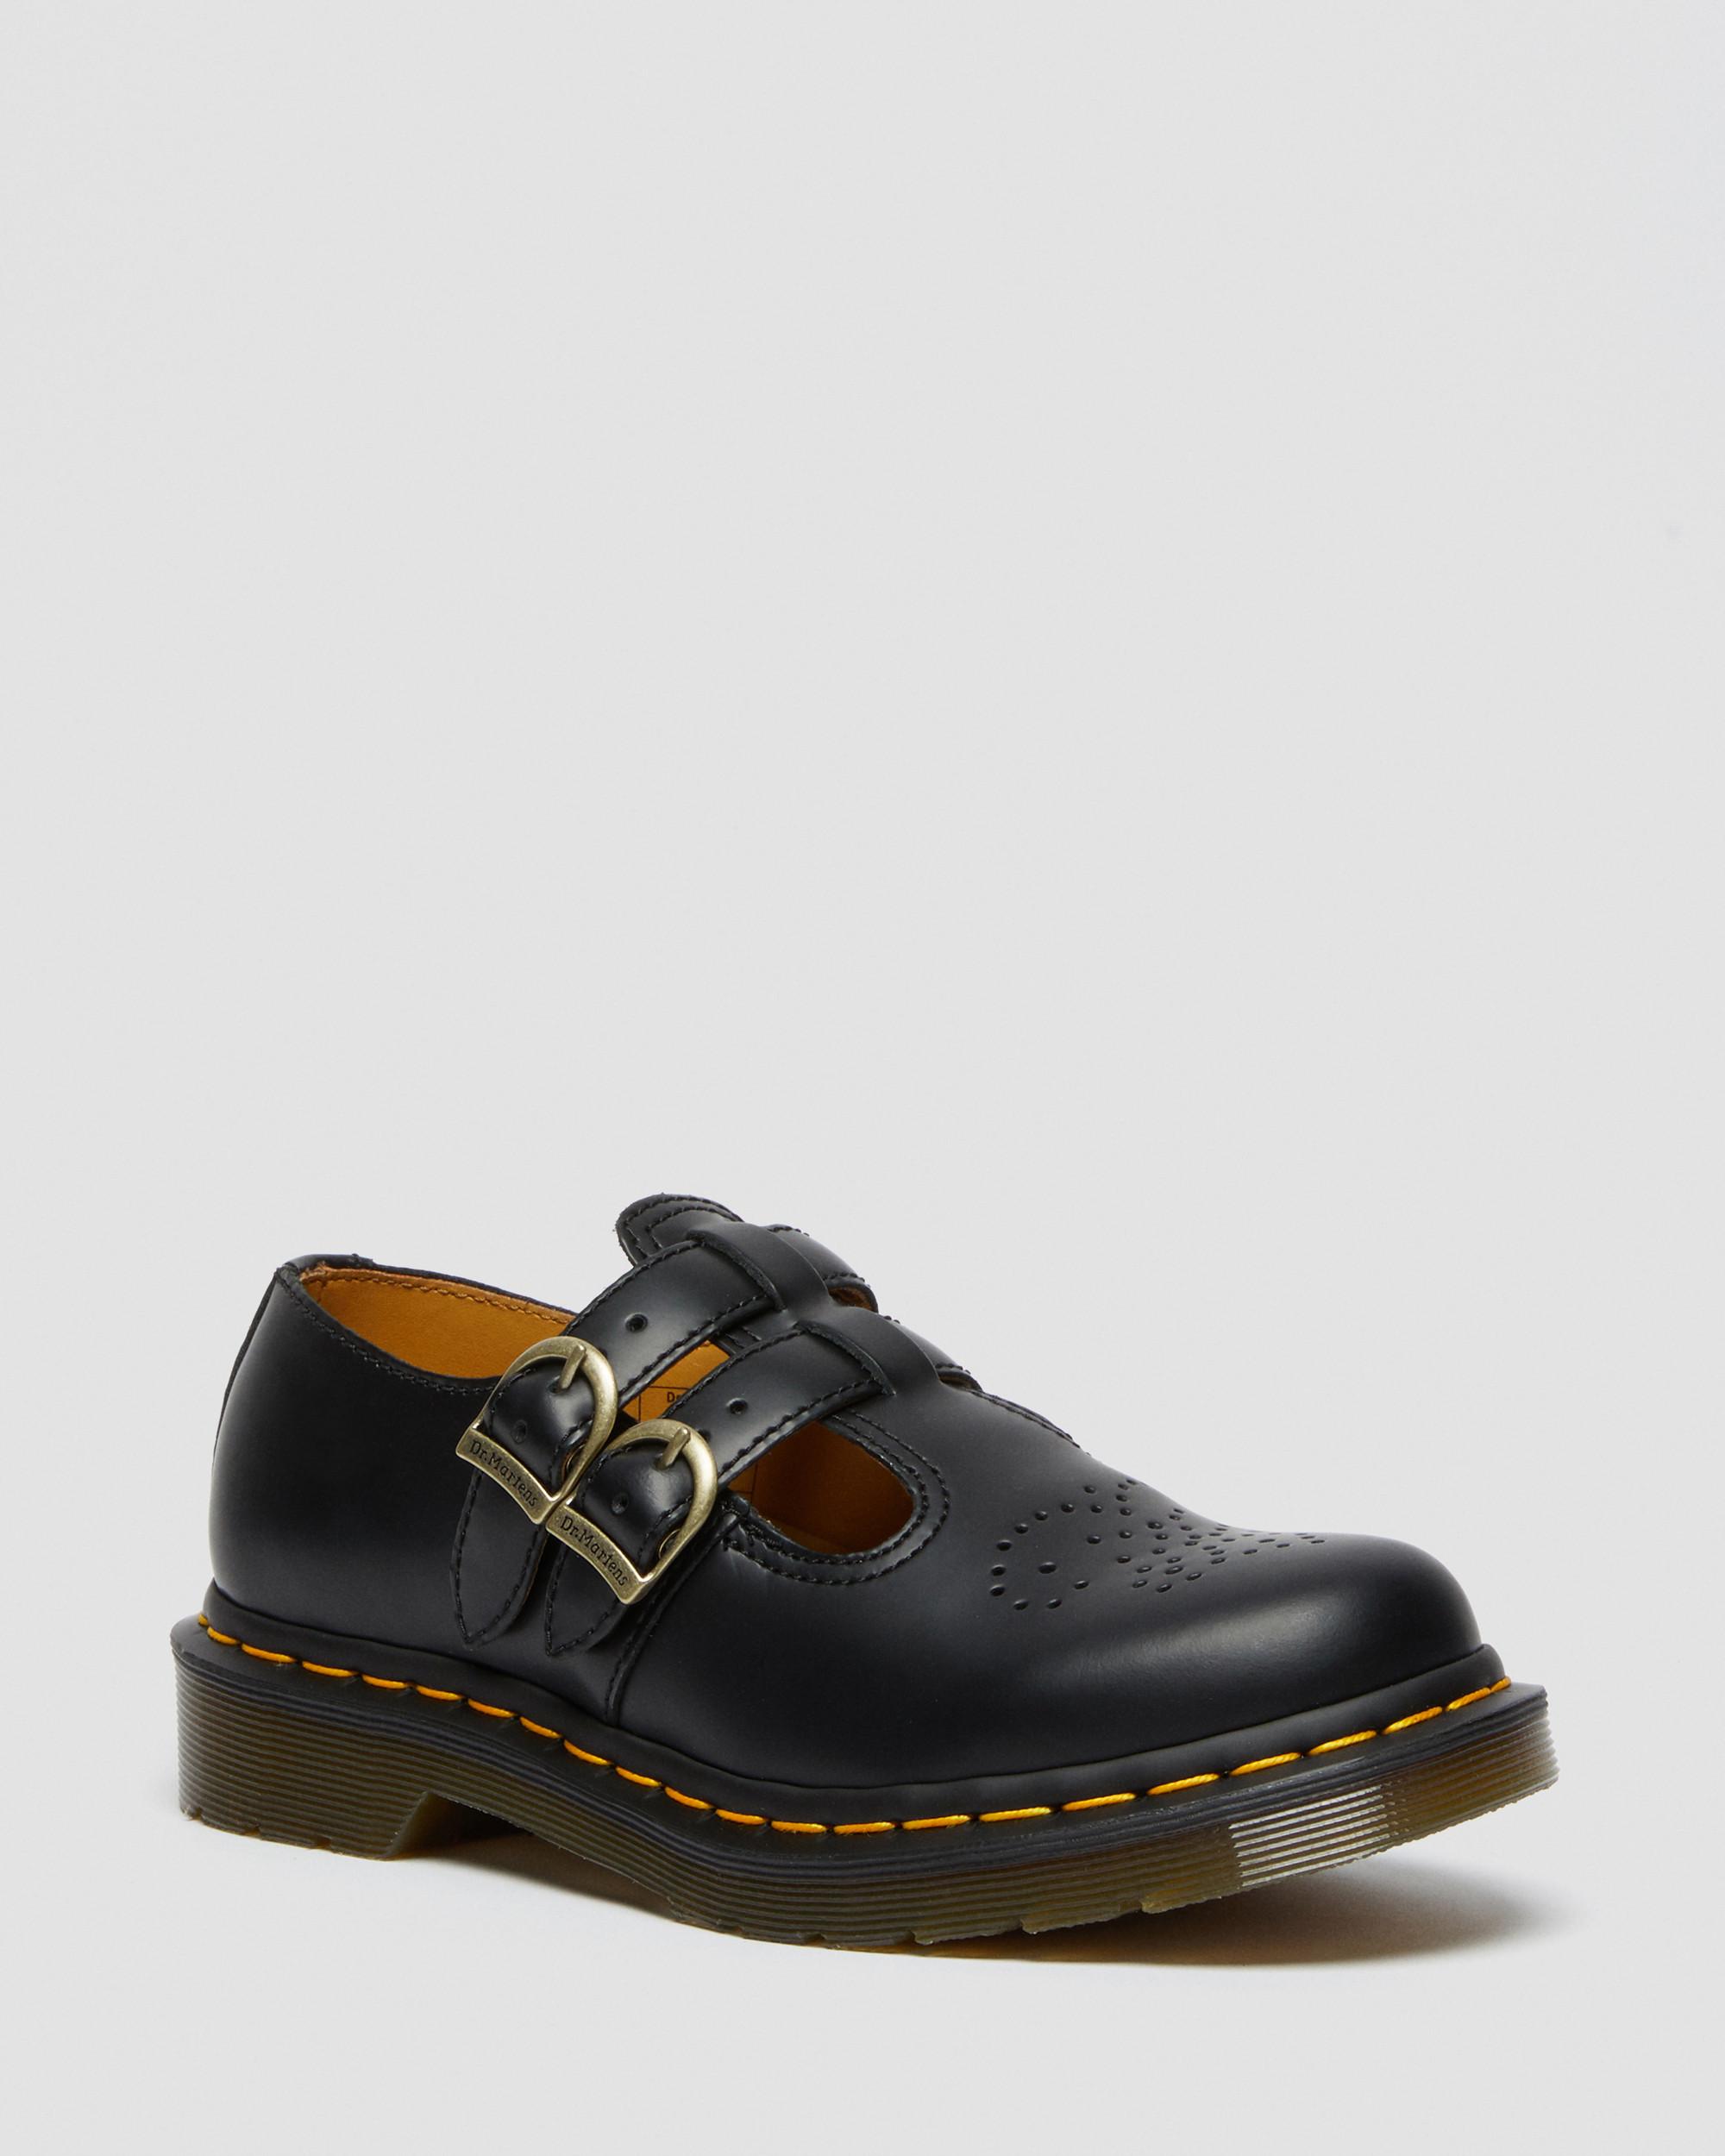 8065 Smooth Leather Mary Jane Shoes, Black | Dr. Martens